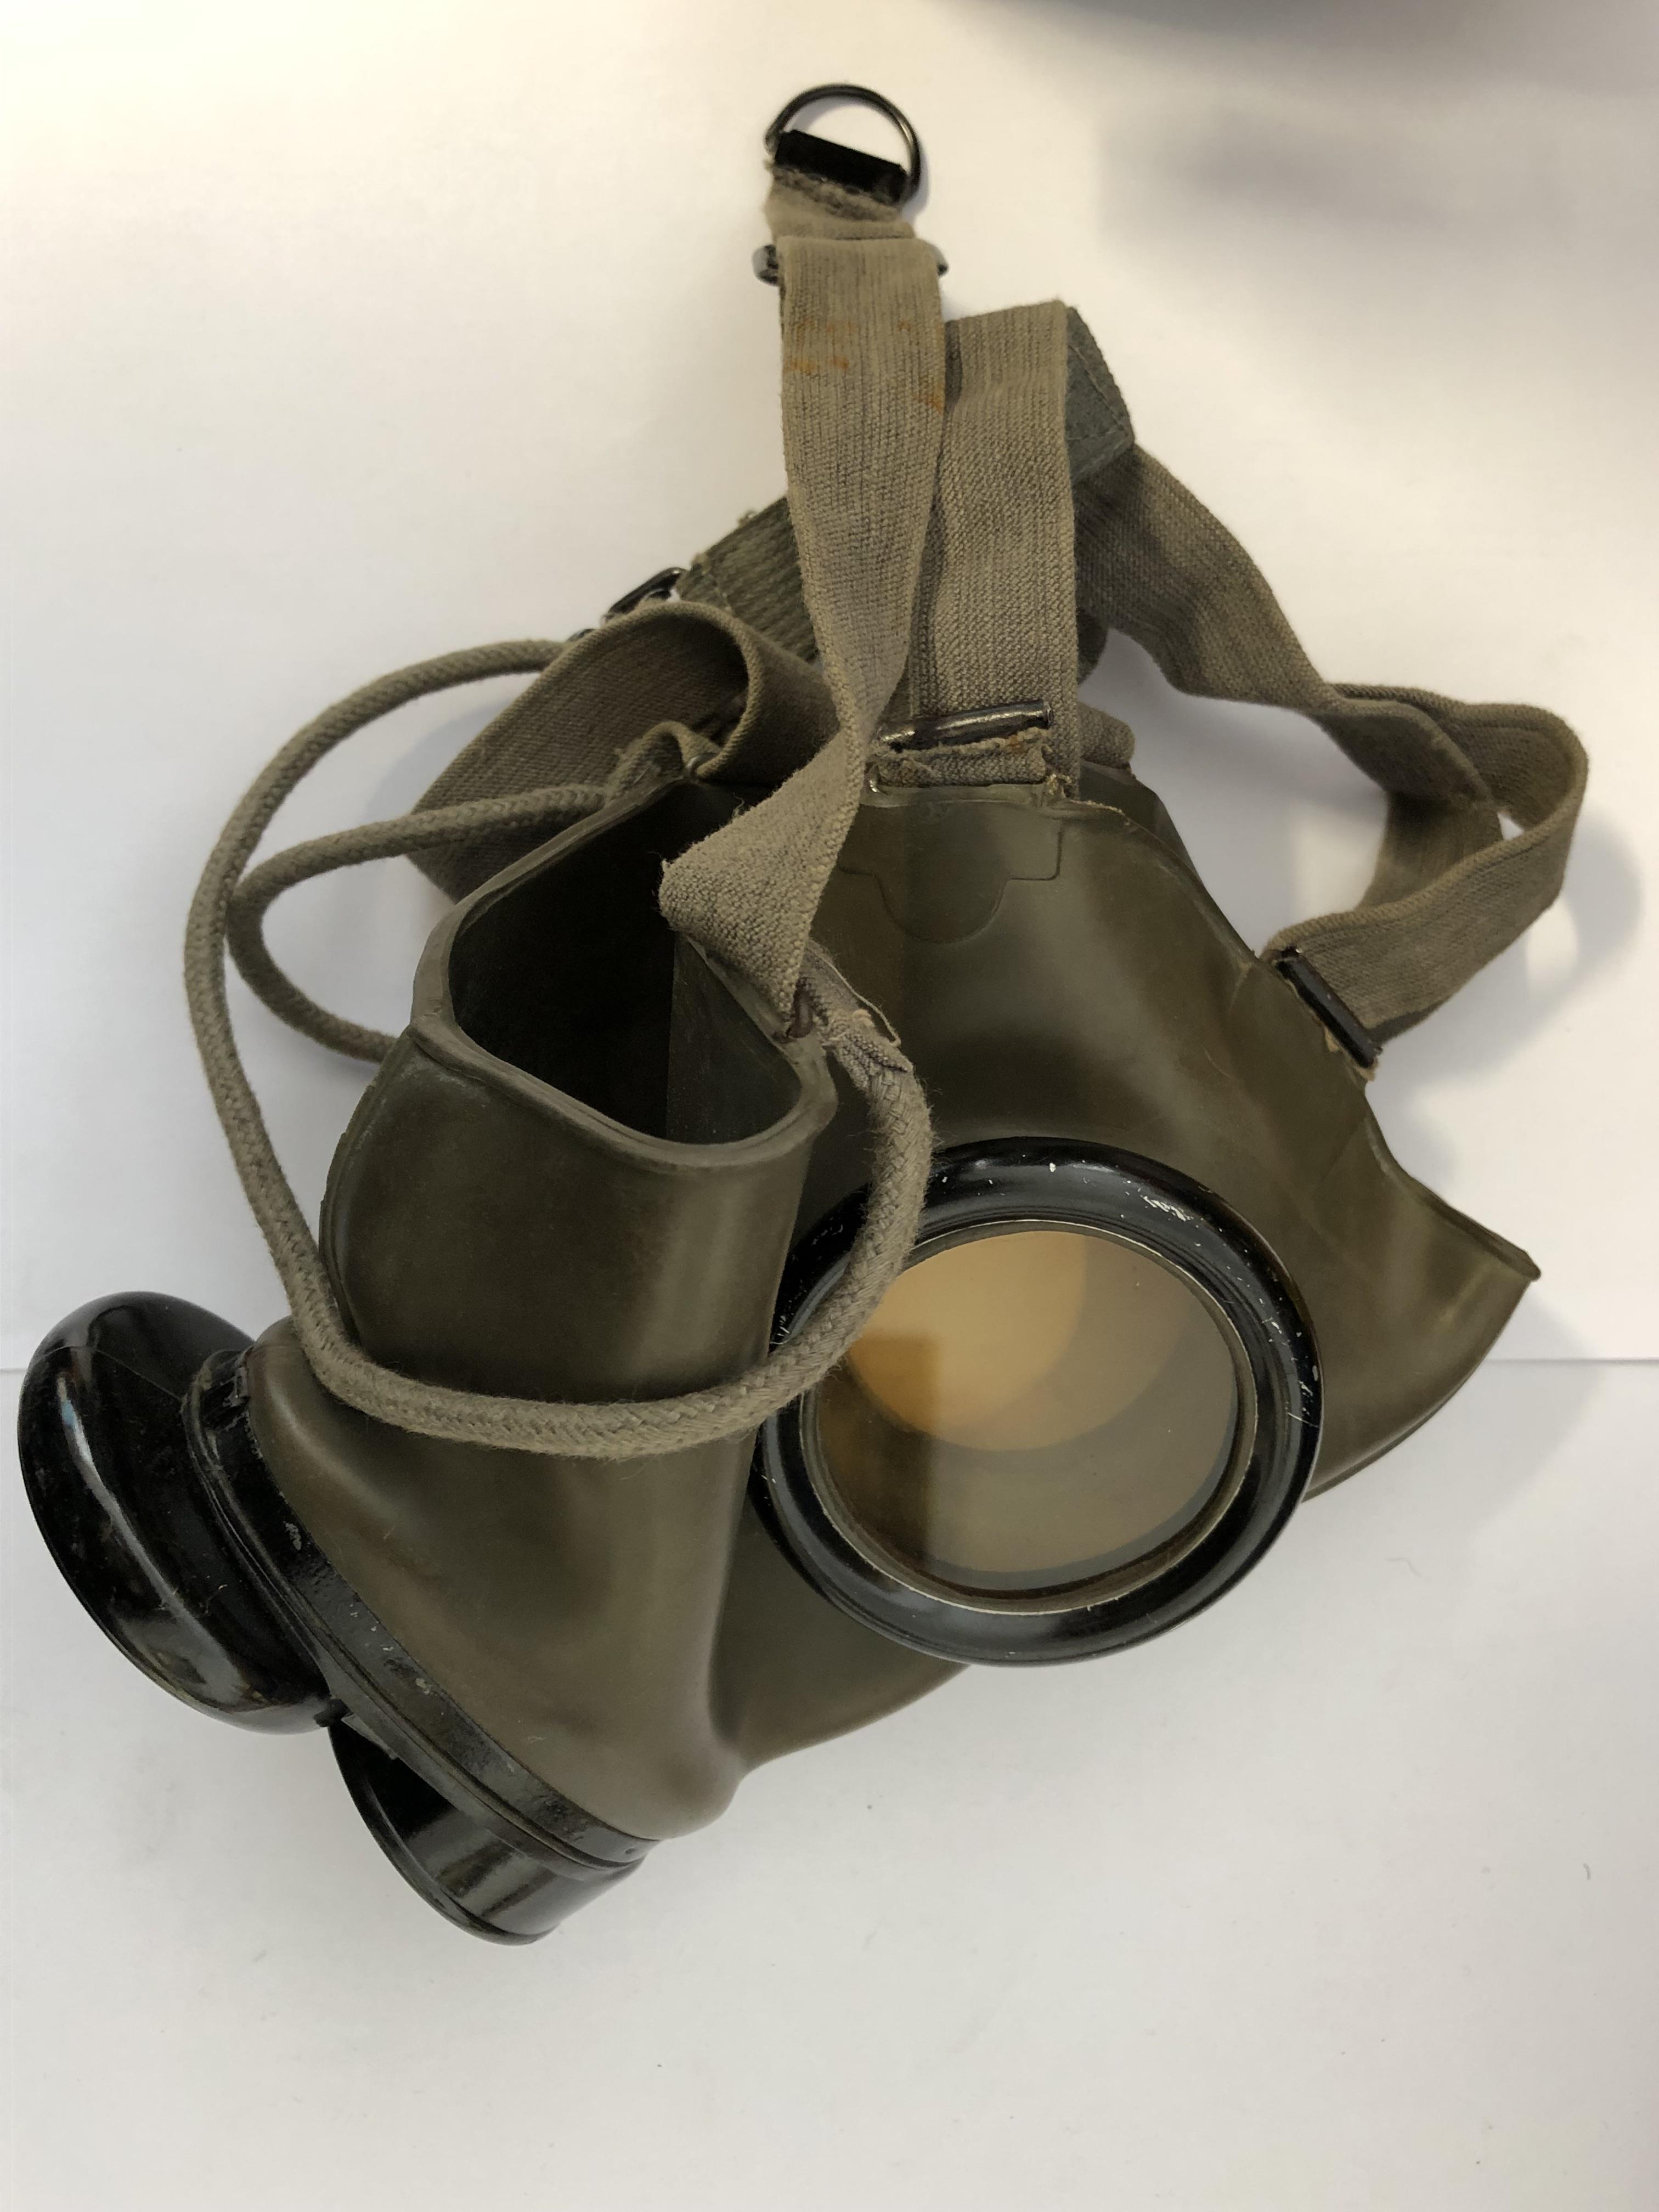 WWII GERMAN GAS MASK DATED 1940 WITH CANISTER - Image 5 of 7